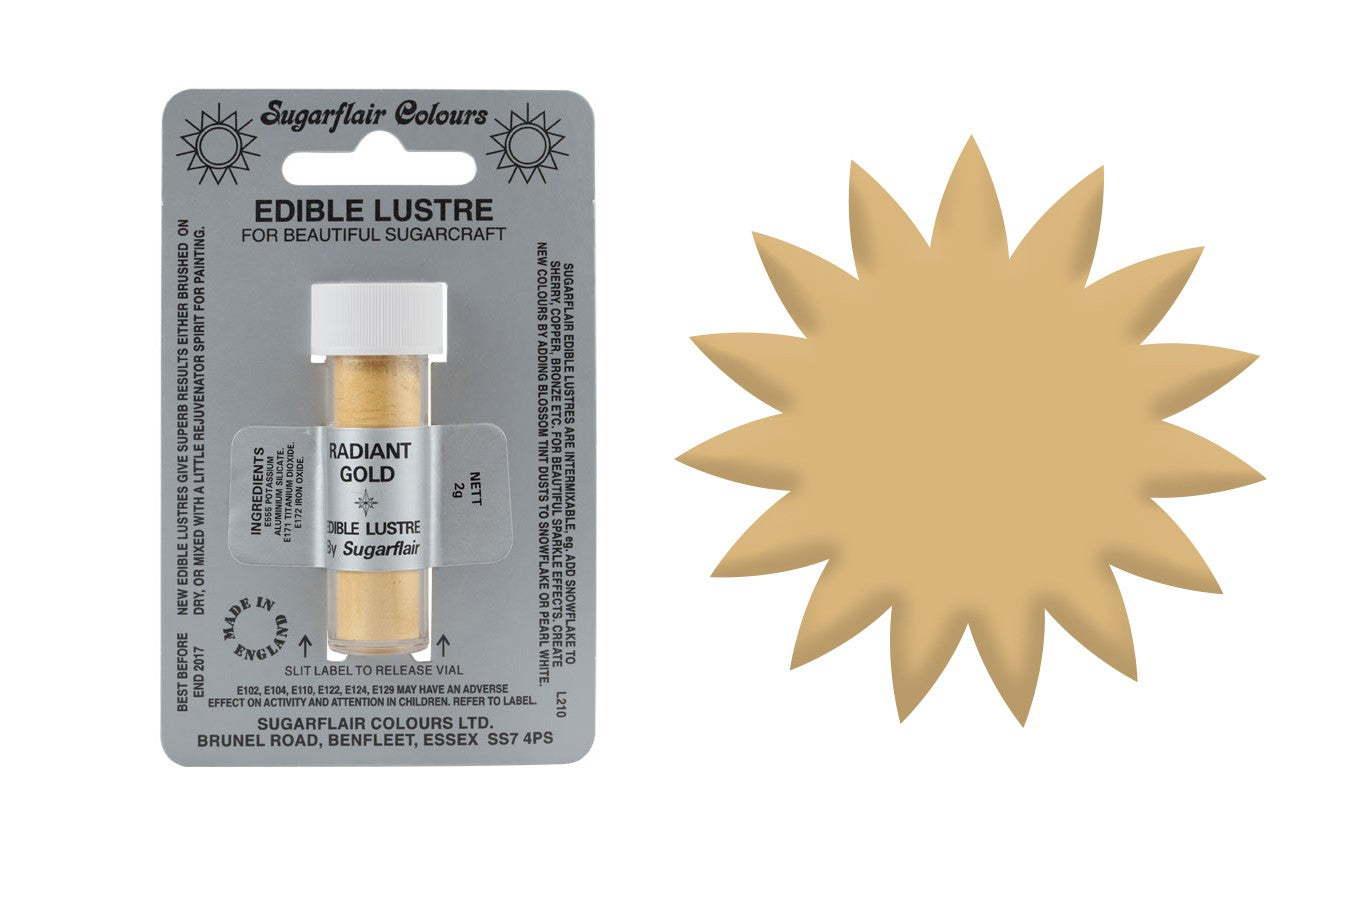 Sugarflair Edible Lustre Dust Radiant Gold - The Cooks Cupboard Ltd